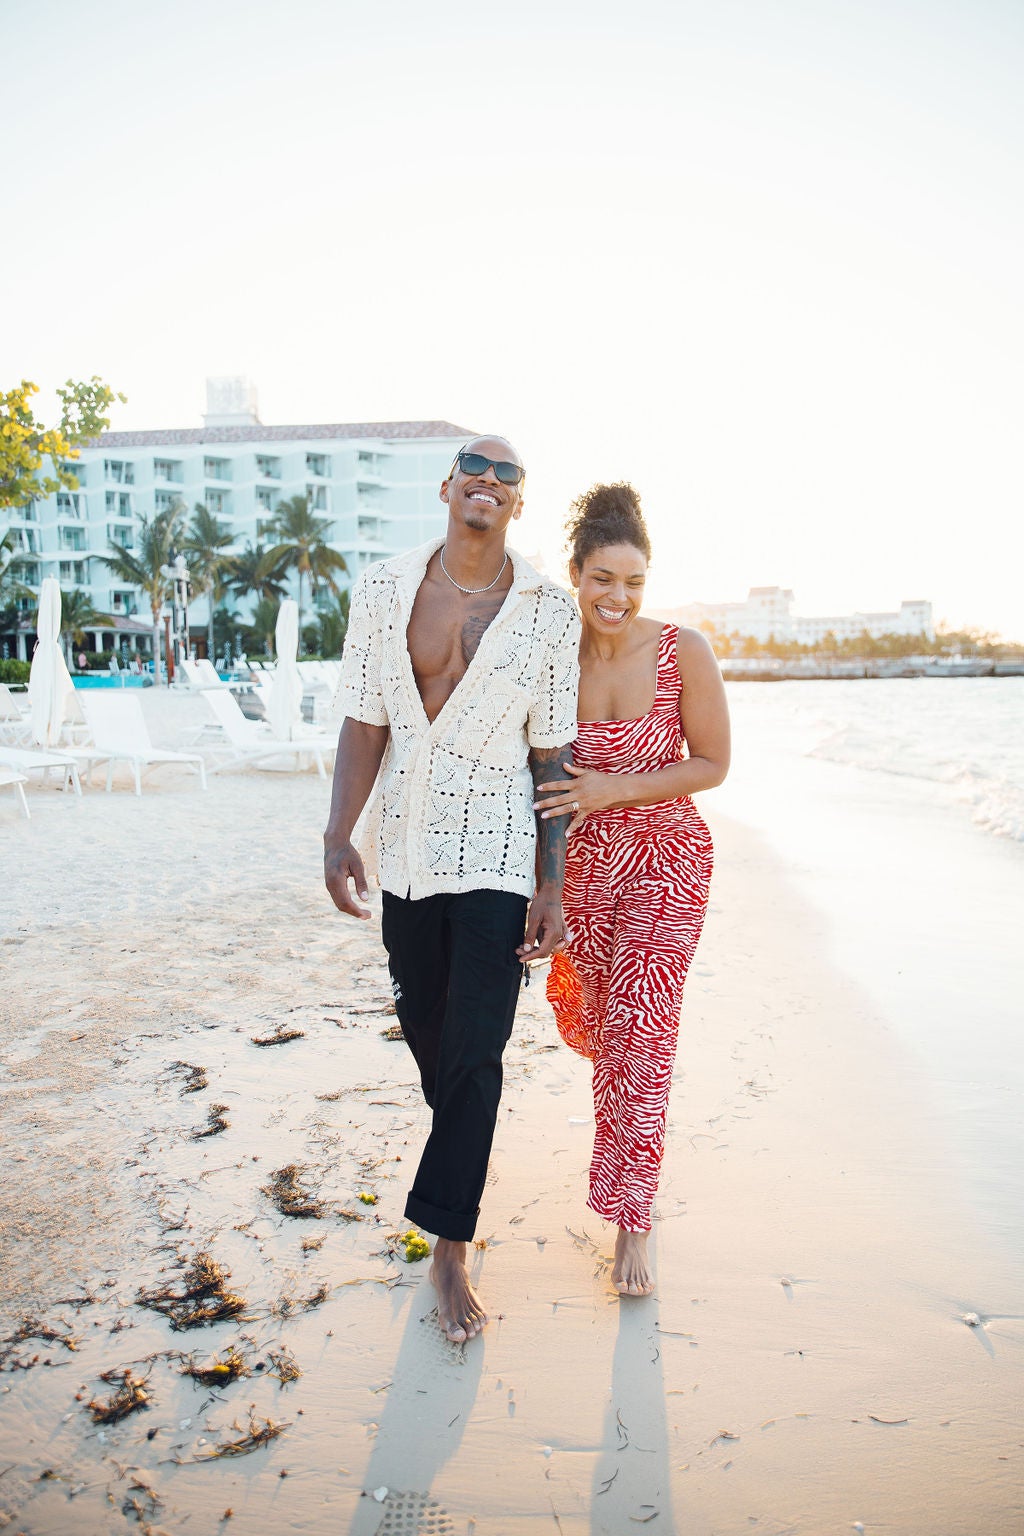 Jordin Sparks And Her Husband Vacationed At Sandals Dunn’s River In Jamaica